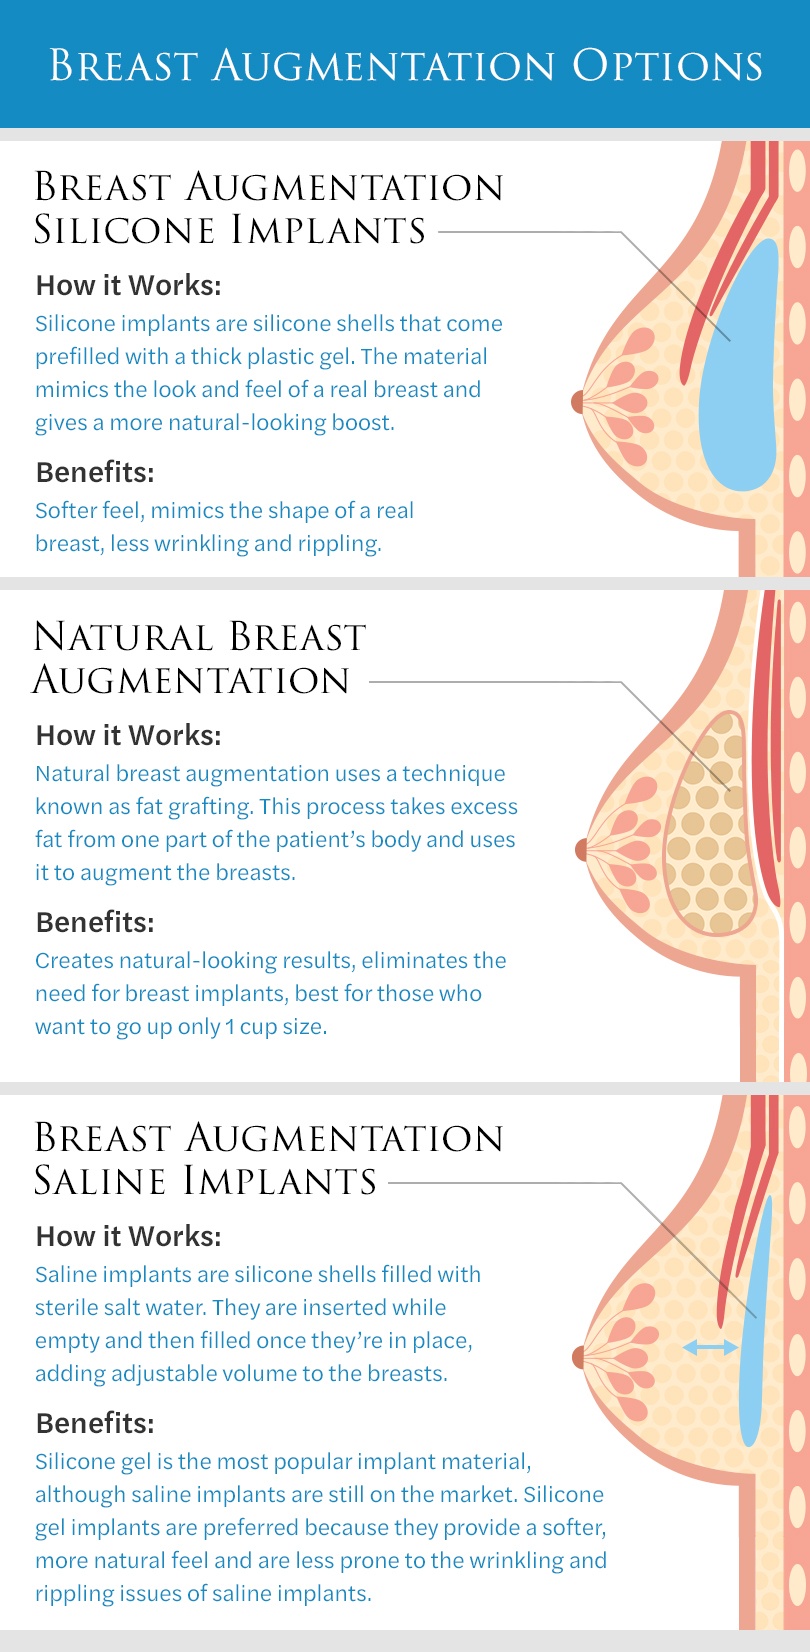 Checkout  Breast implants sizes, Breast surgery, Implants breast